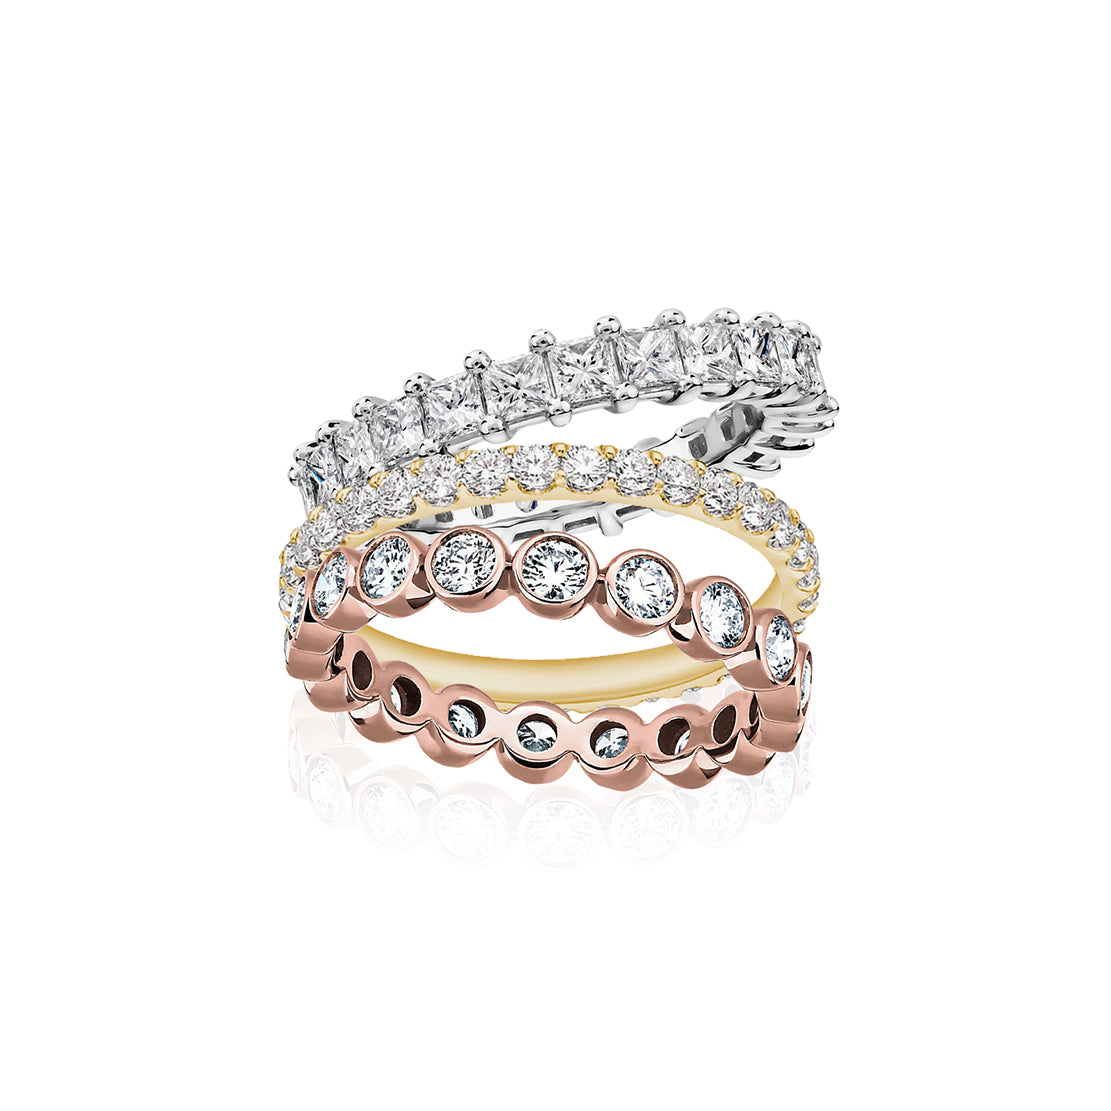 Mix, Match, Stack! Stackable Diamond Rings